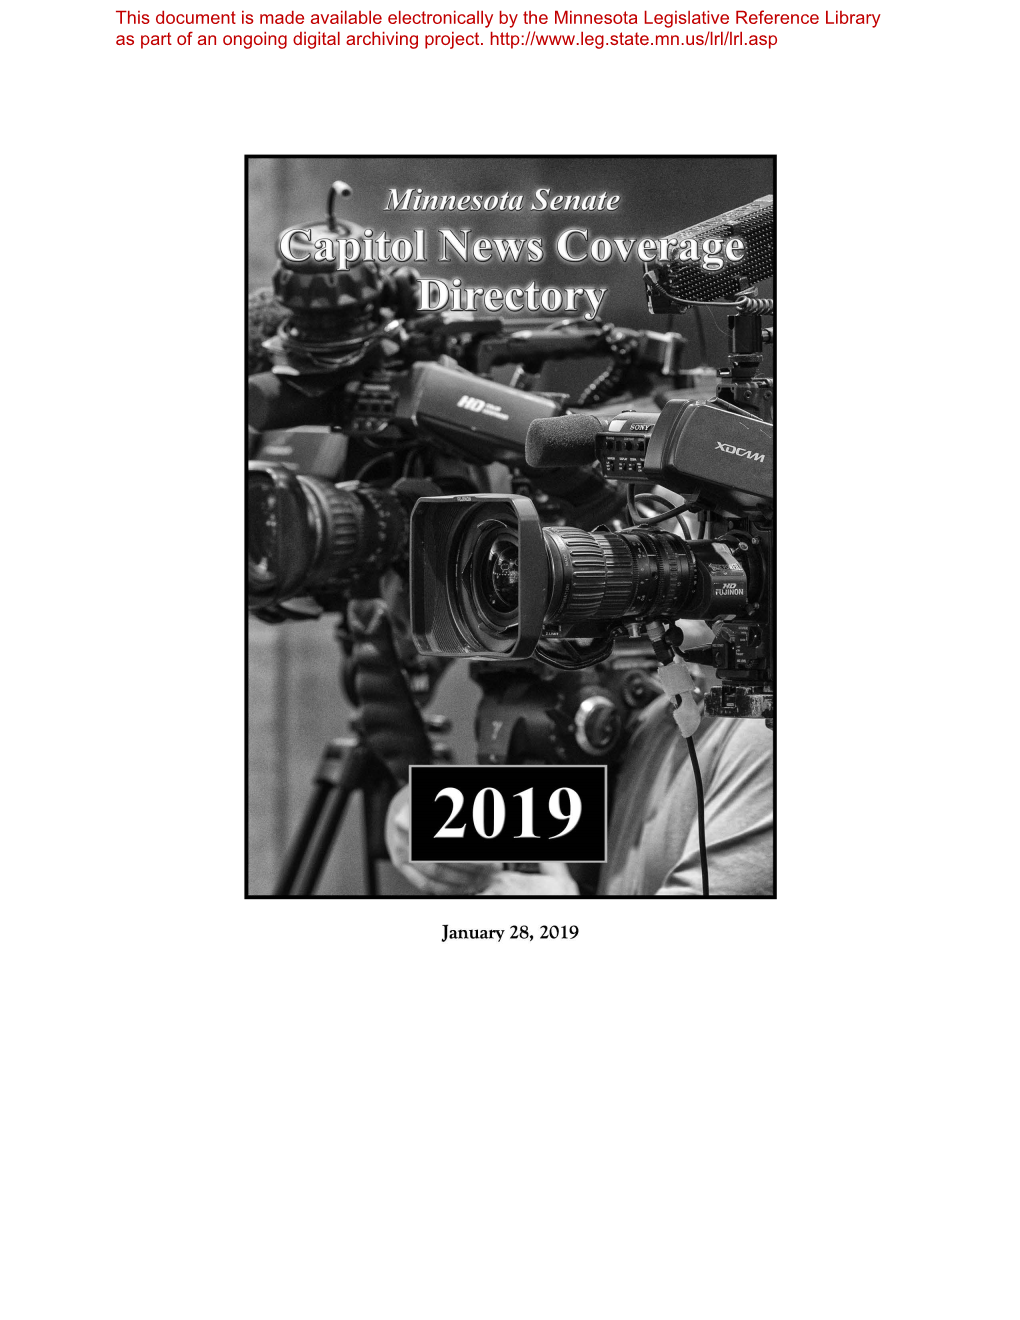 Capitol News Coverage Directory 2019